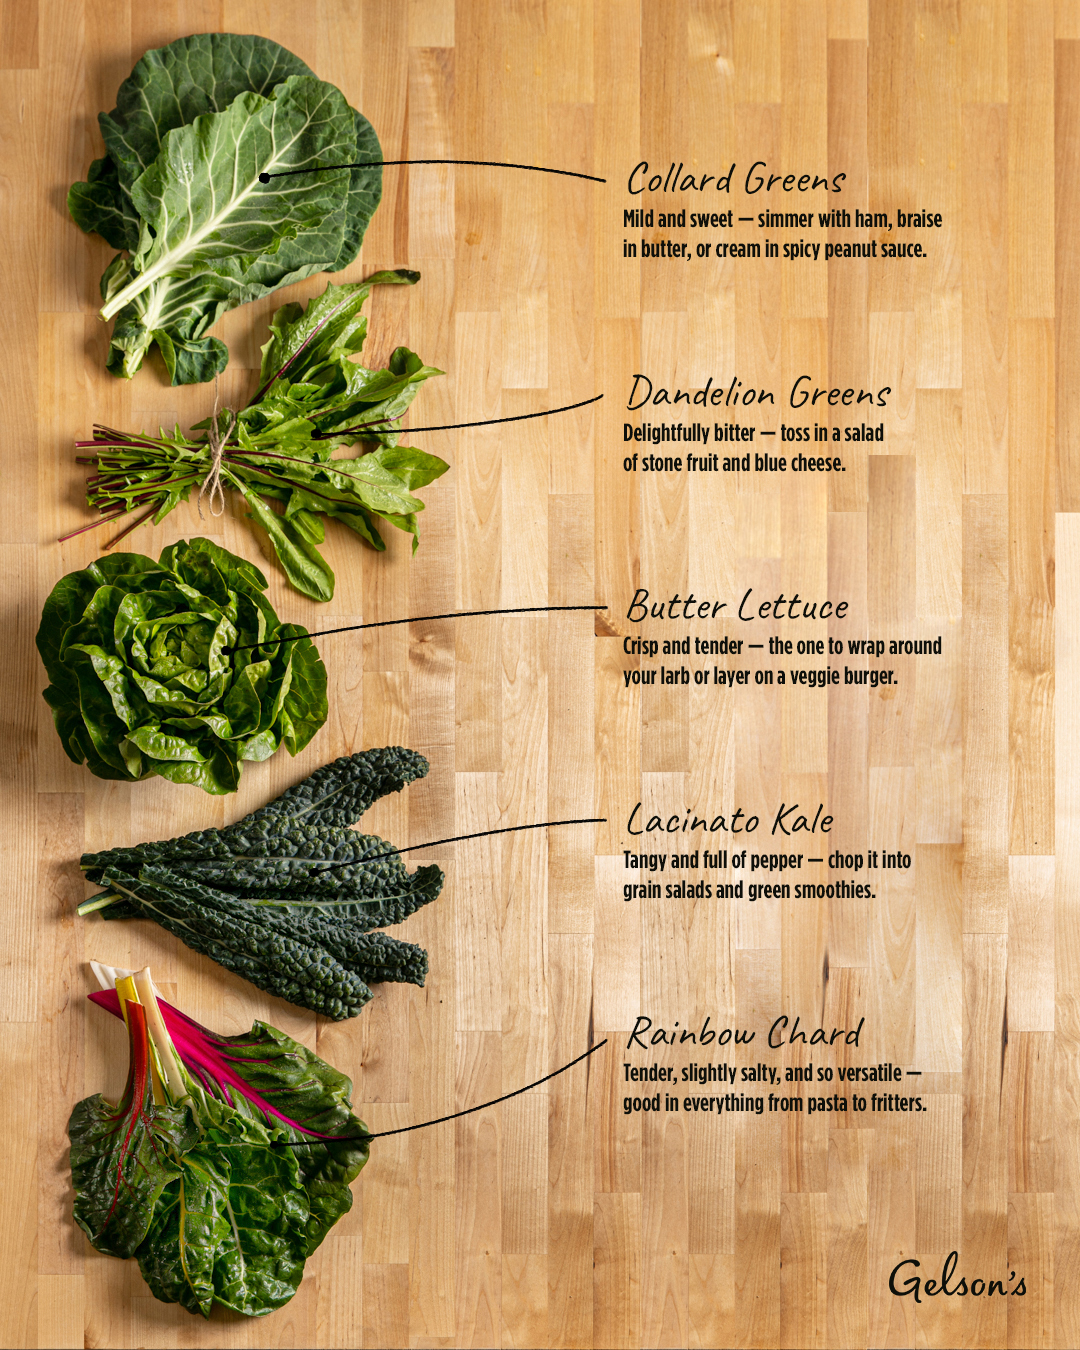 Home Cook's Guide to Greens